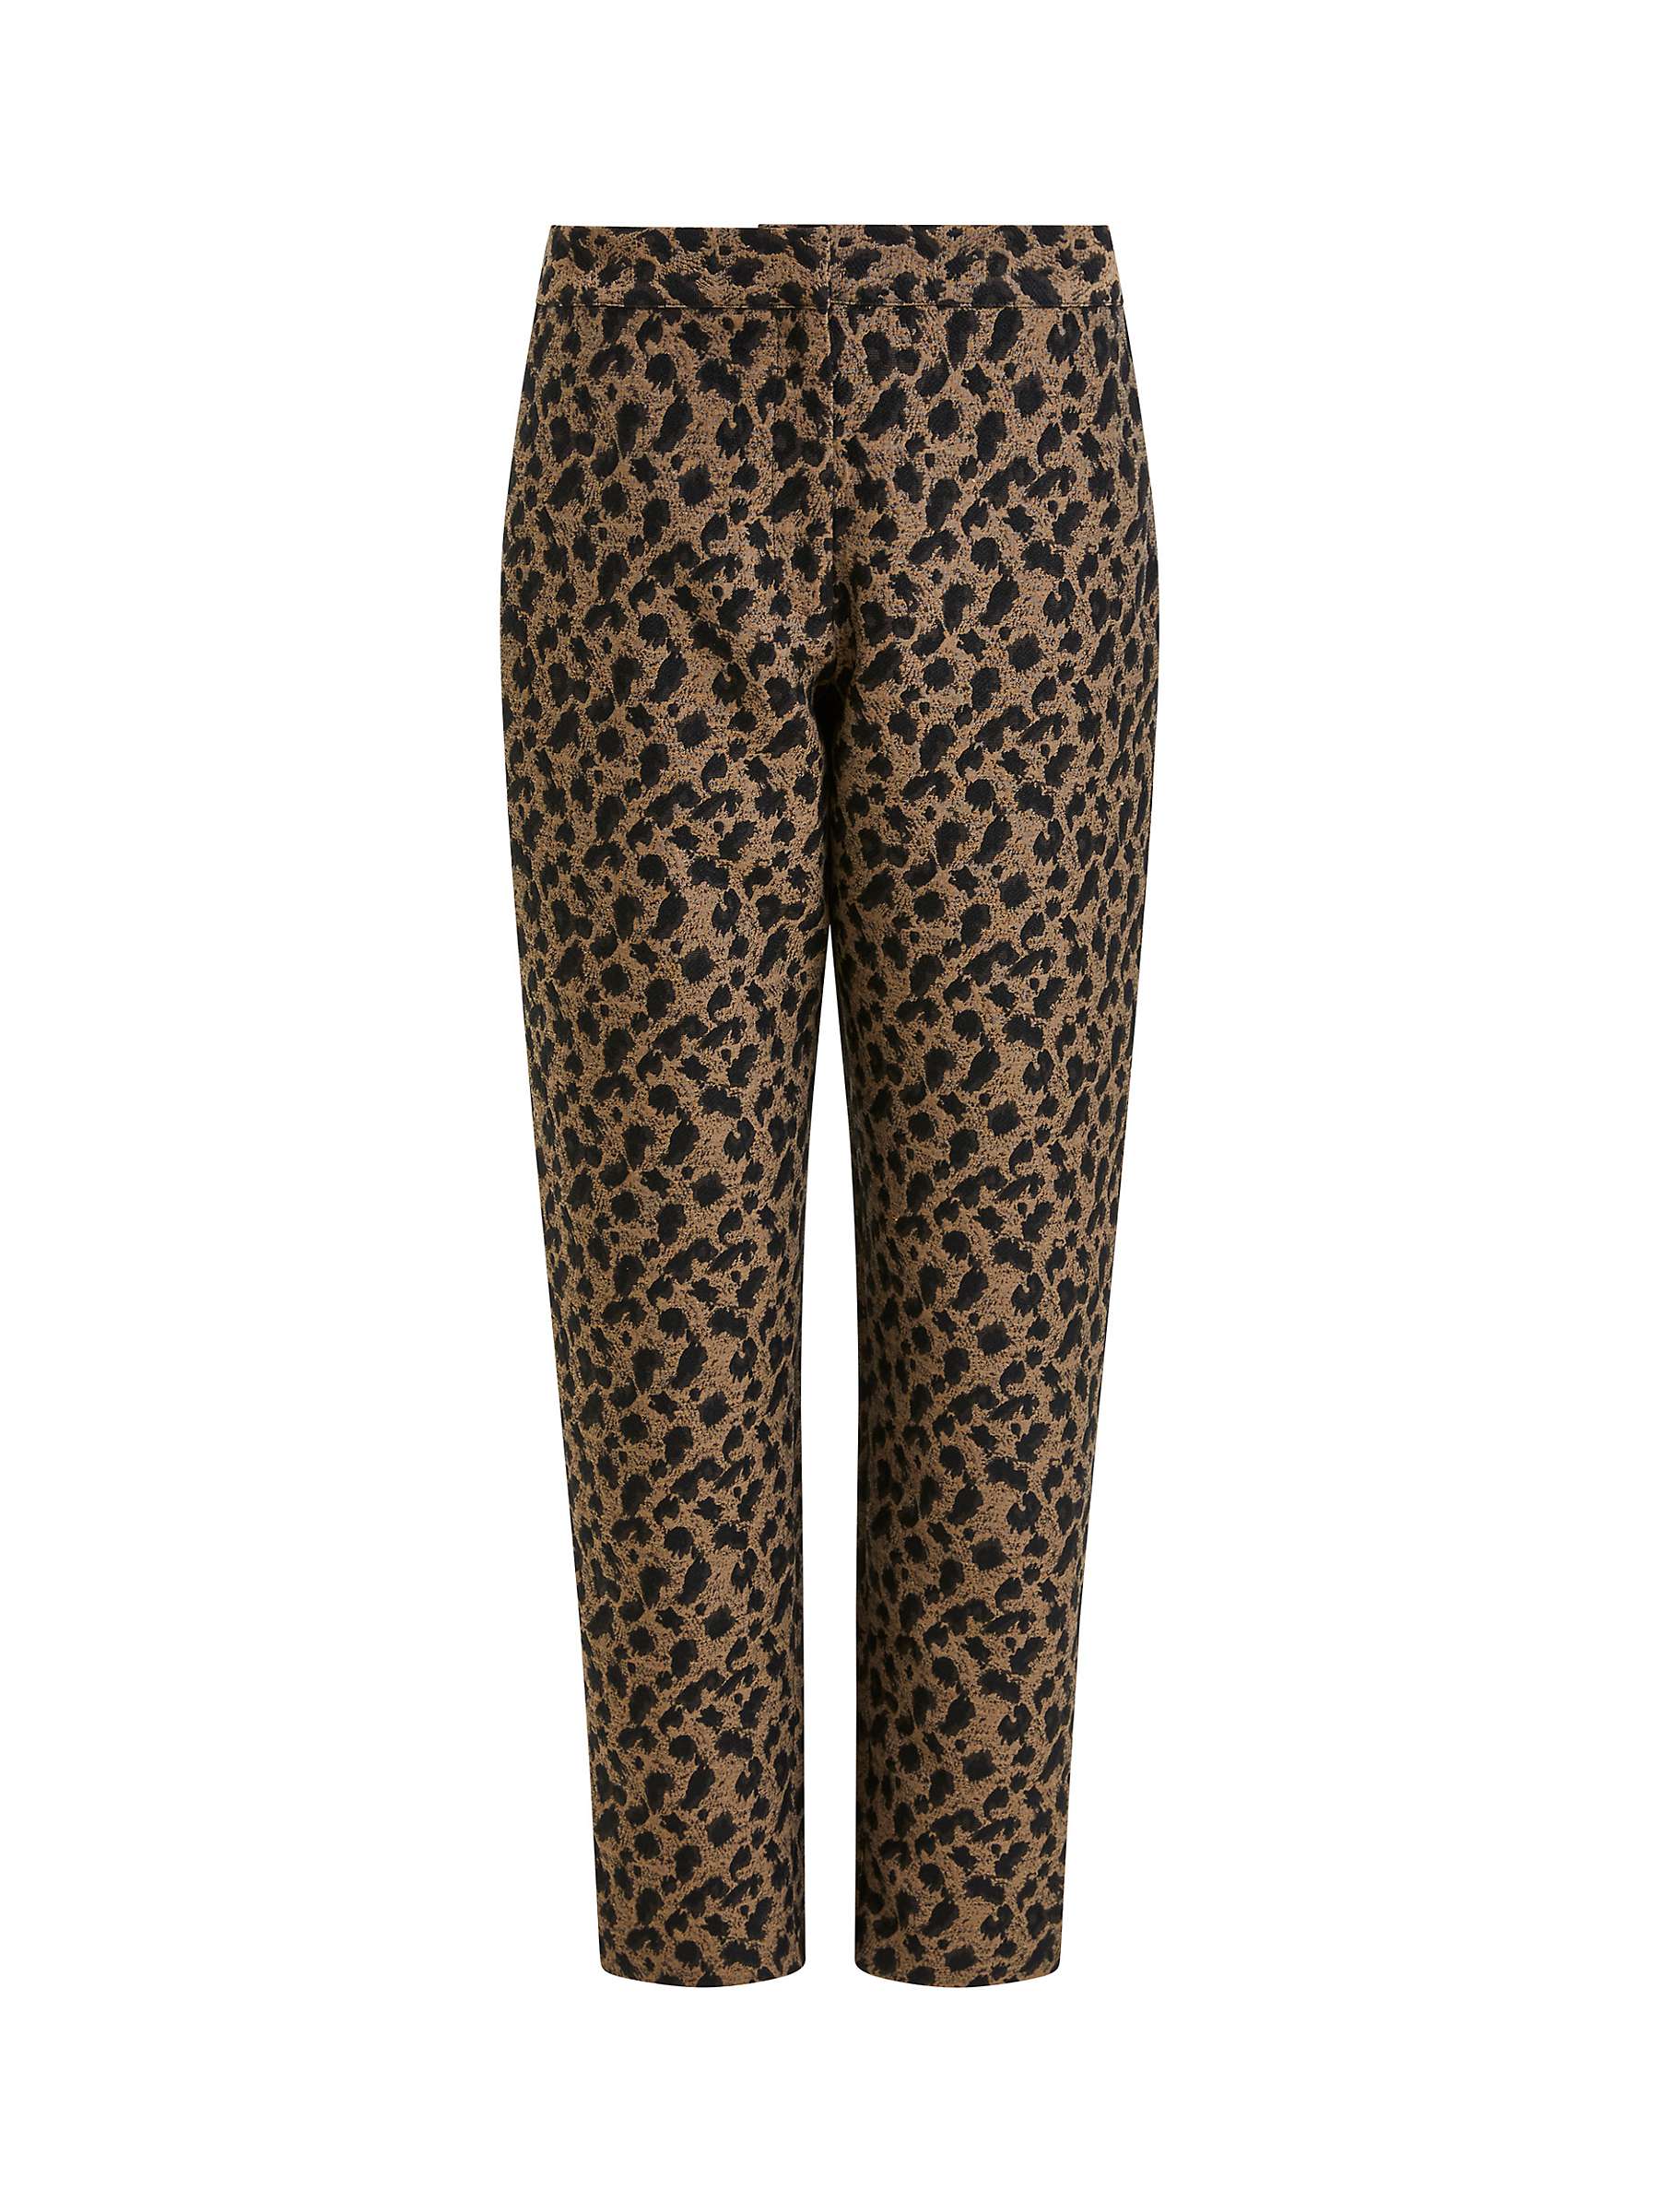 Buy French Connection Estella Jacquard Trousers, Black/Brown Online at johnlewis.com